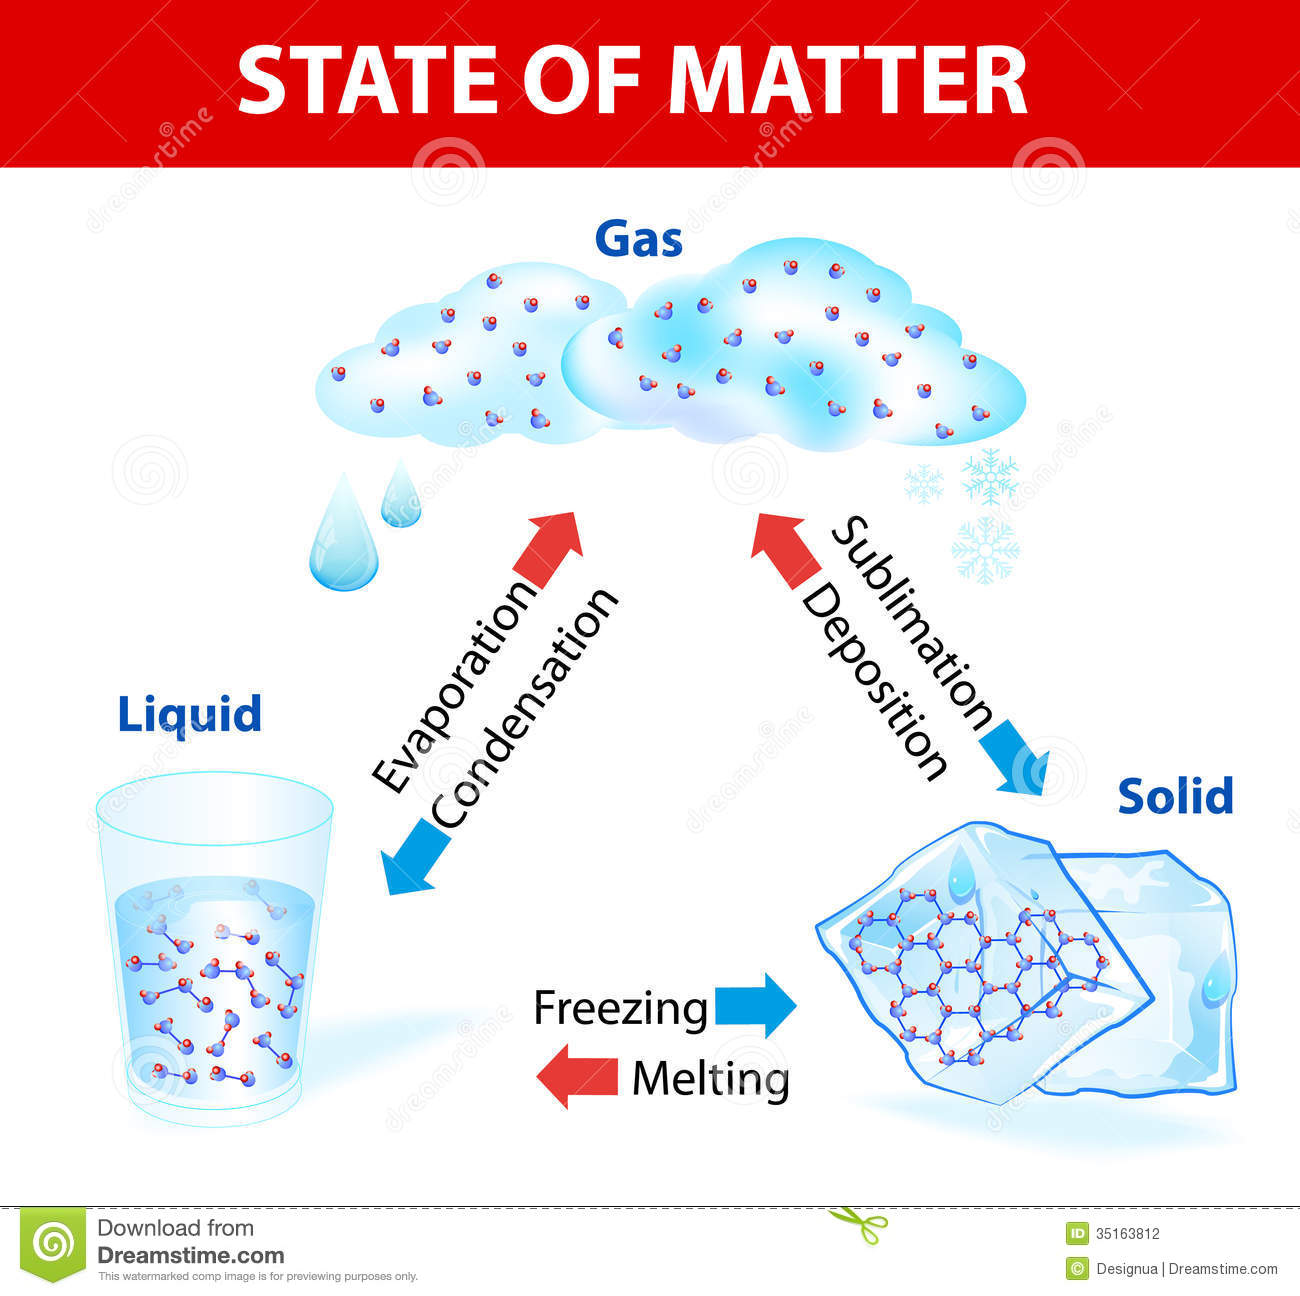 Any Temperature The Liquid Molecules With The Greatest Kinetic Energy